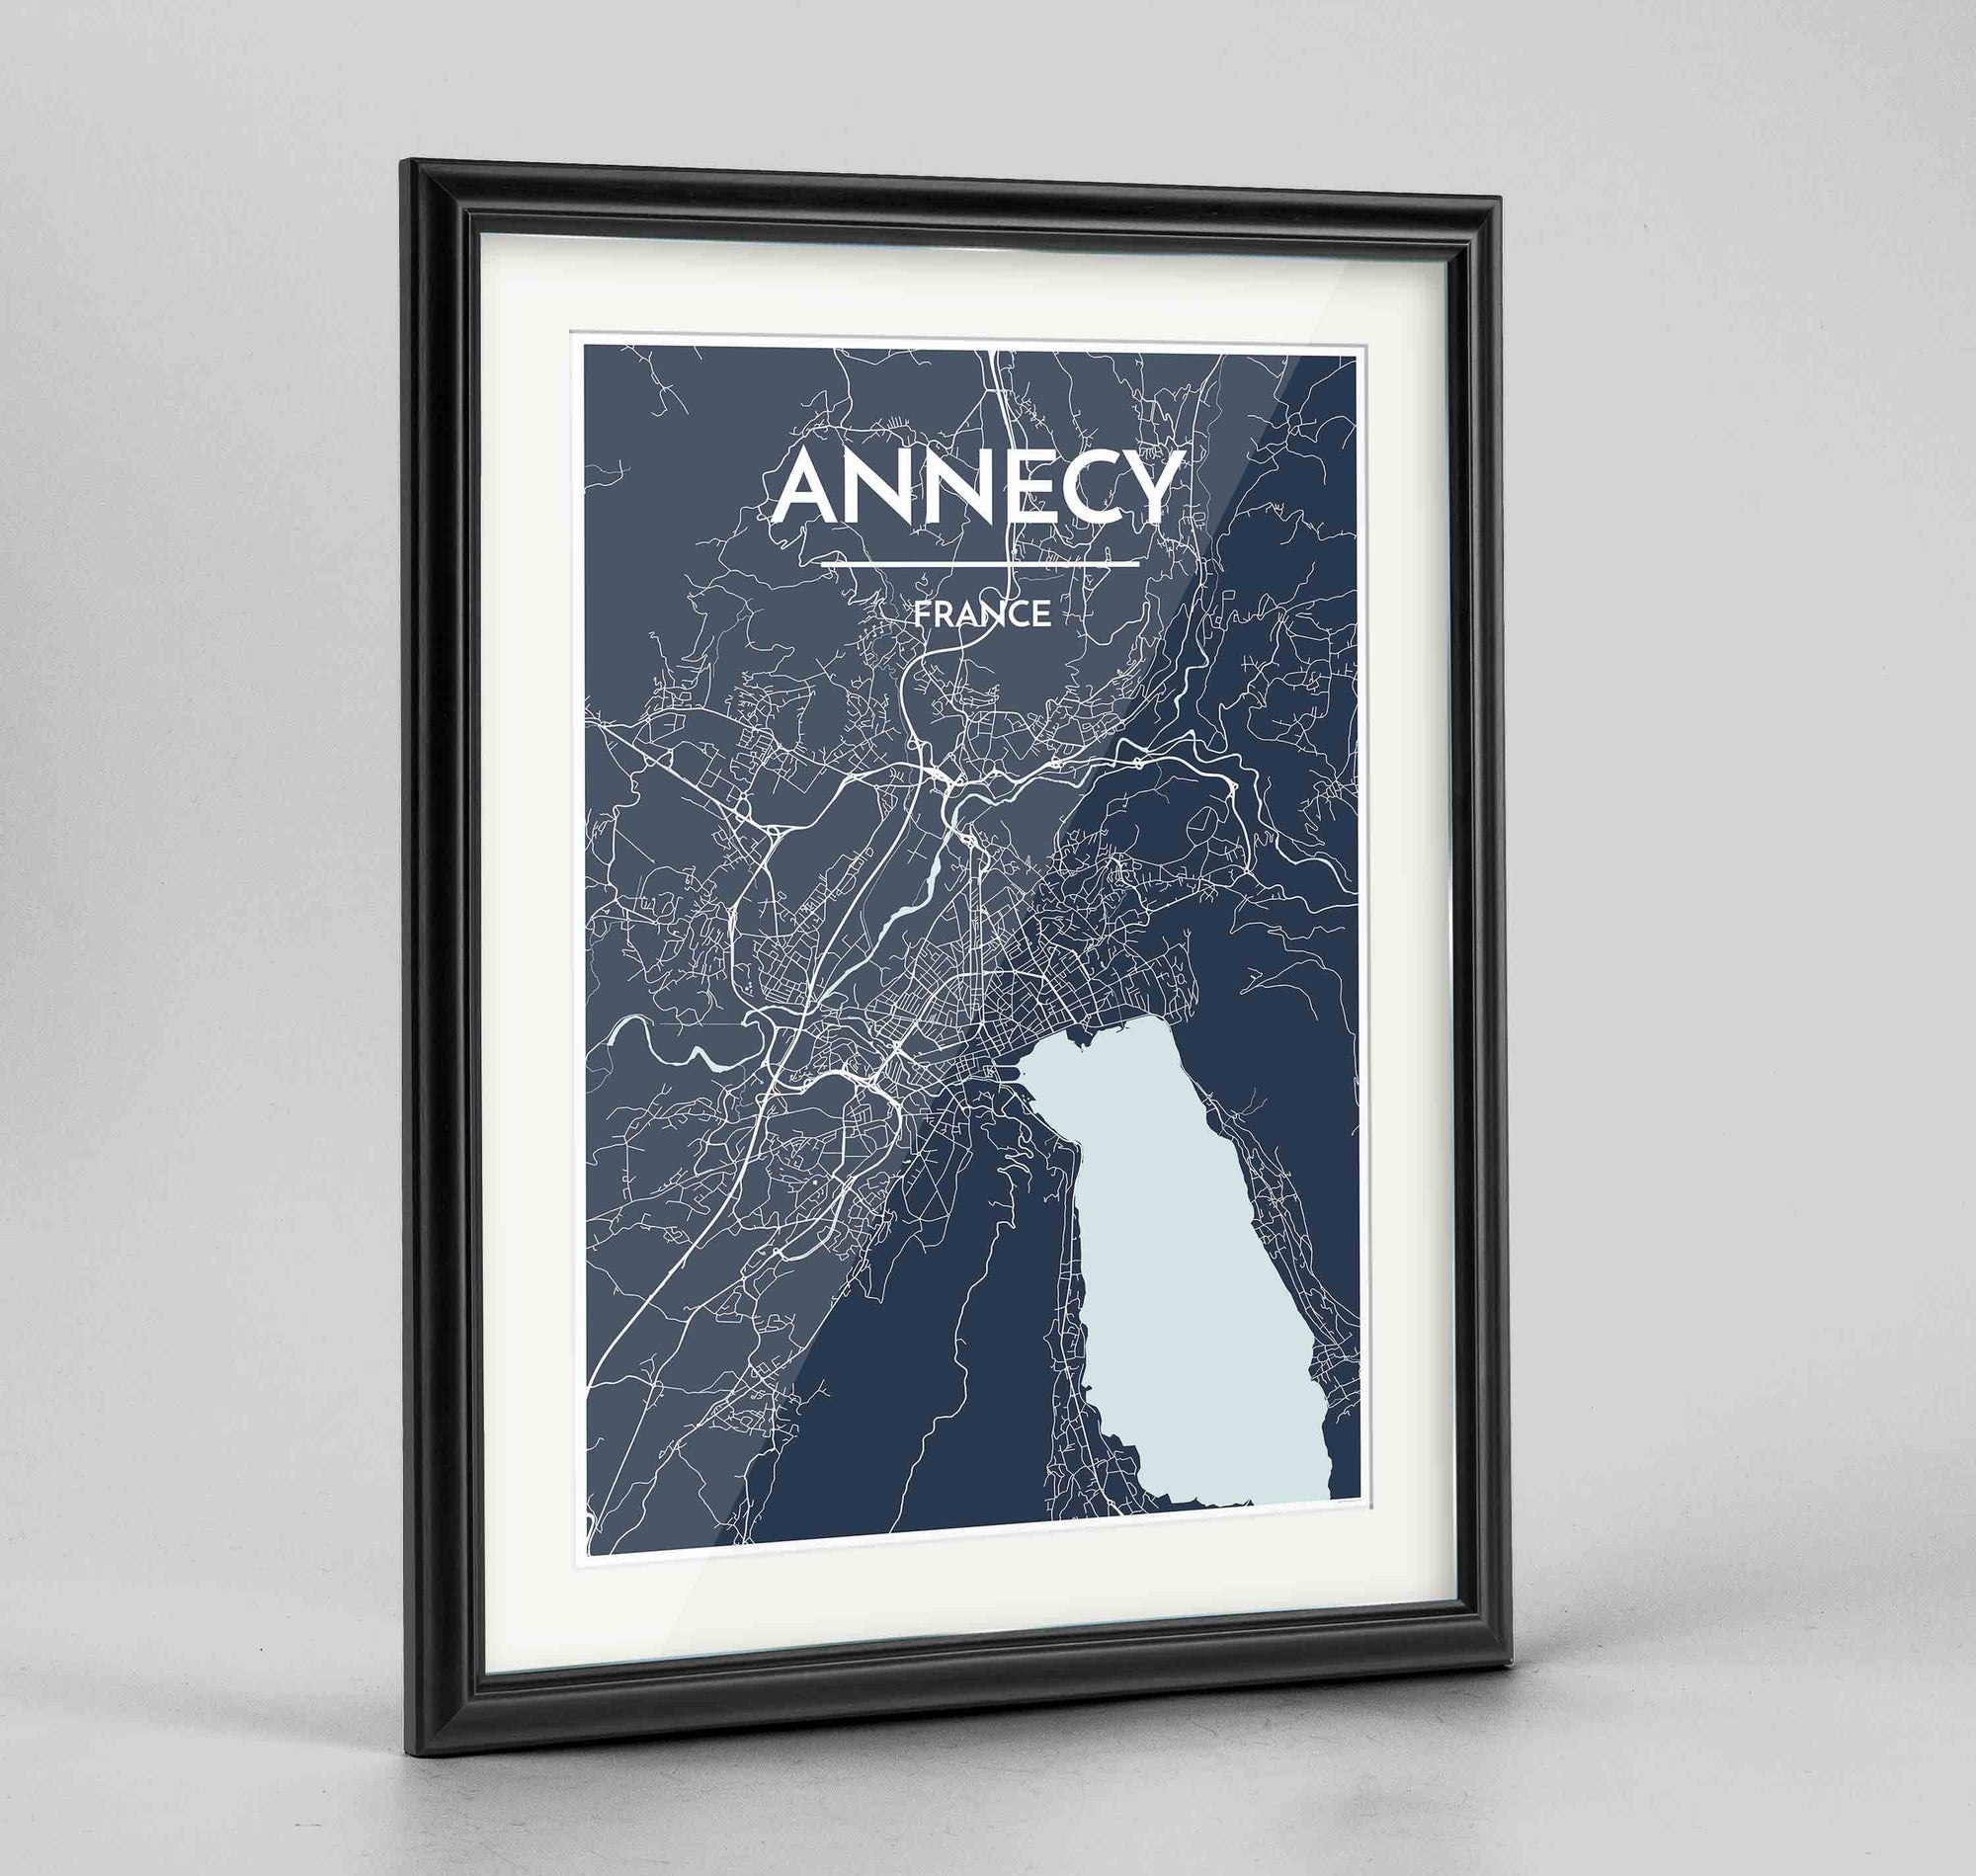 Framed Annecy Map Art Print 24x36" Traditional Black frame Point Two Design Group